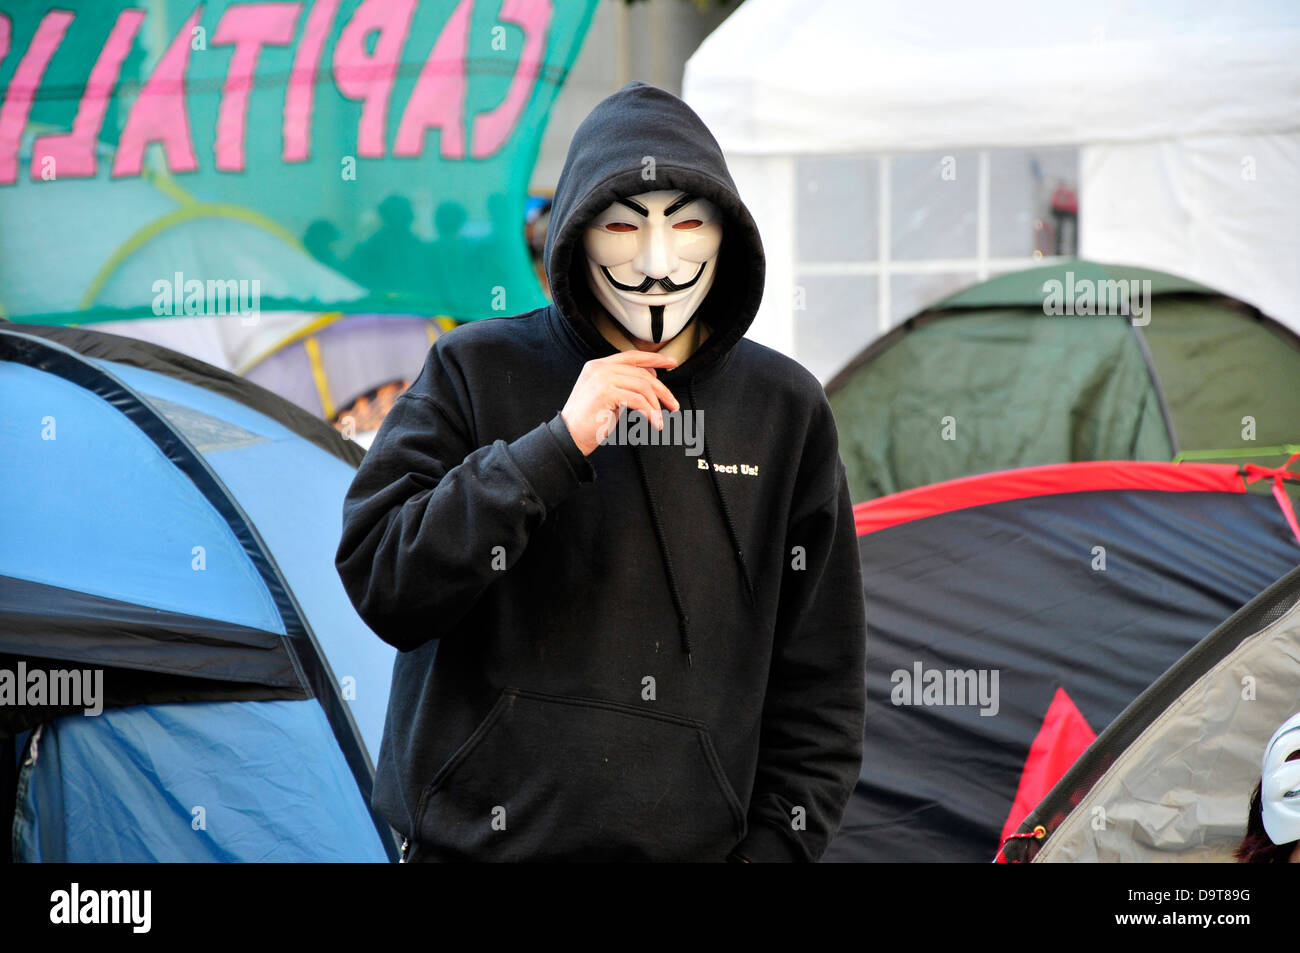 A protester wearing an anonymous mask, St Paul's Church yard, City of London, UK Stock Photo